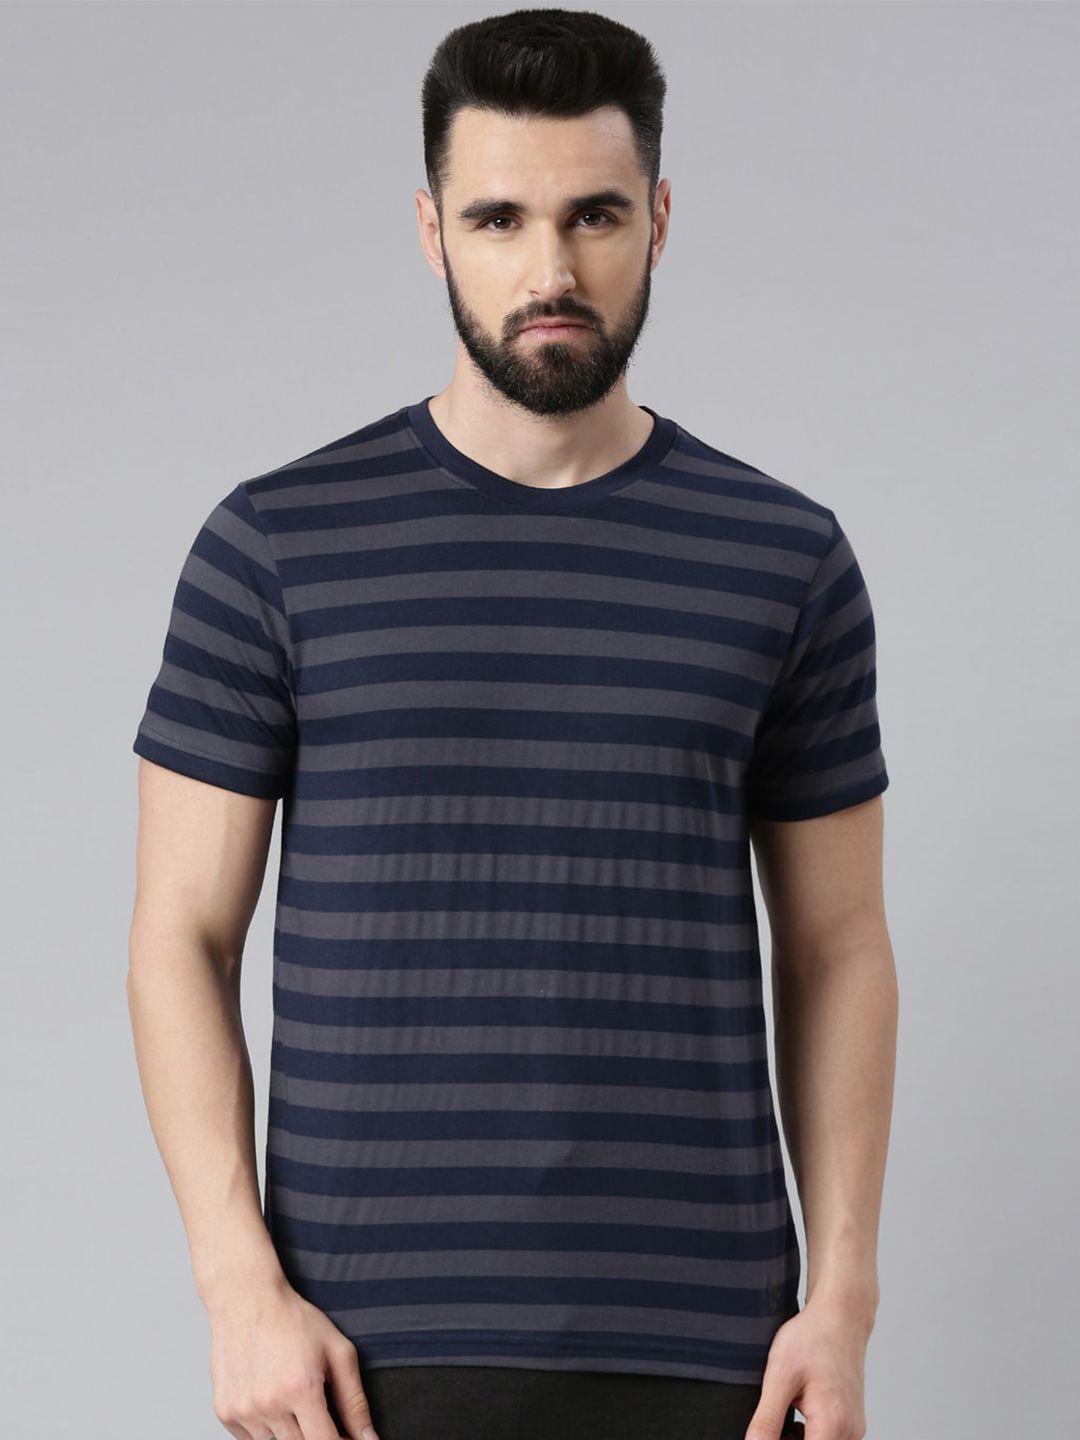 force-nxt-men-striped-pack-of-1-super-combed-cotton-t-shirt